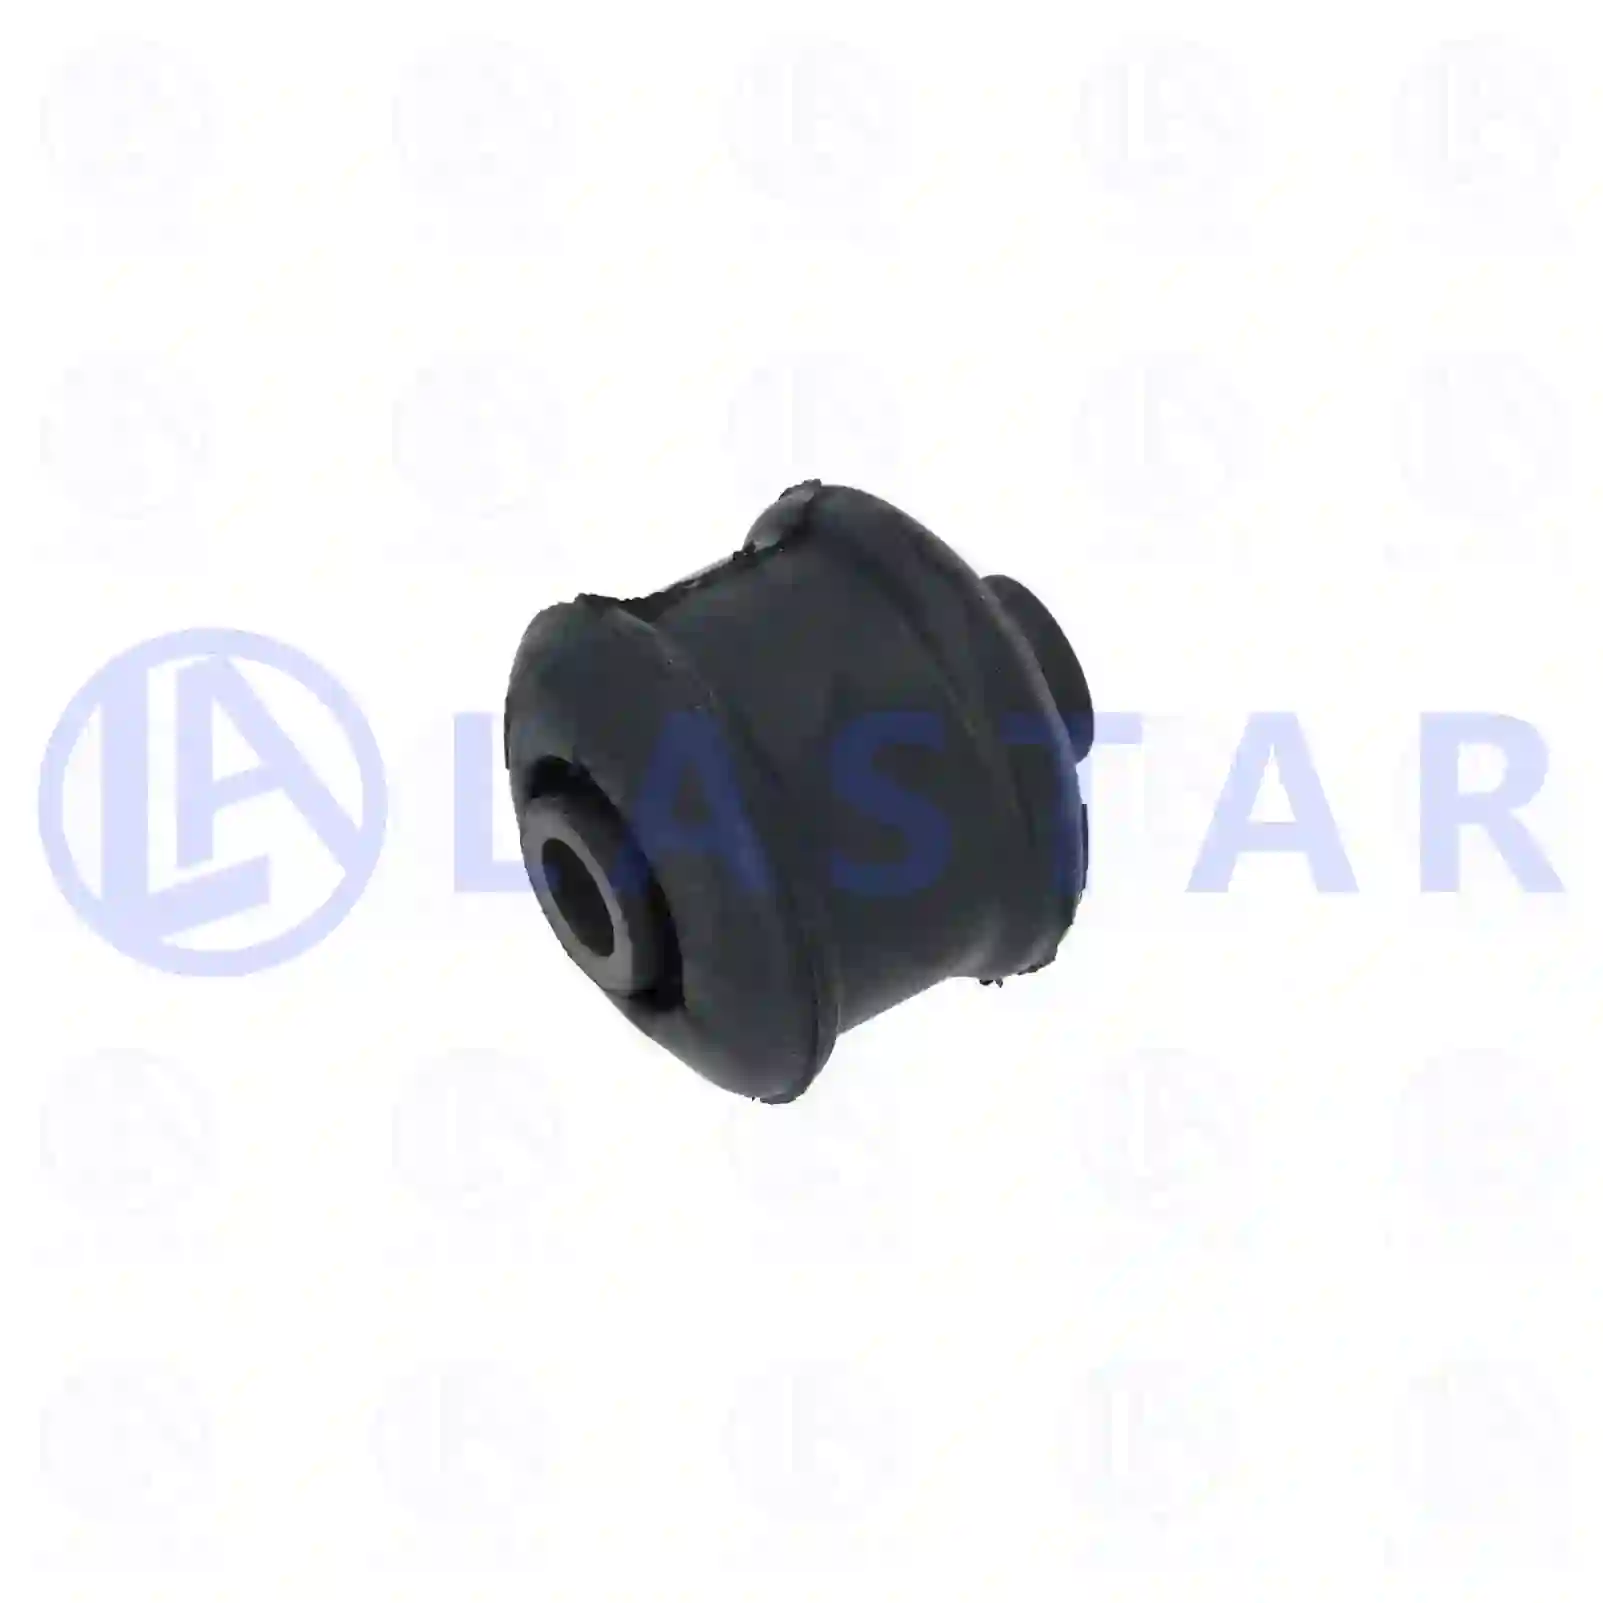 Rubber mounting, 77701819, 4602851003 ||  77701819 Lastar Spare Part | Truck Spare Parts, Auotomotive Spare Parts Rubber mounting, 77701819, 4602851003 ||  77701819 Lastar Spare Part | Truck Spare Parts, Auotomotive Spare Parts